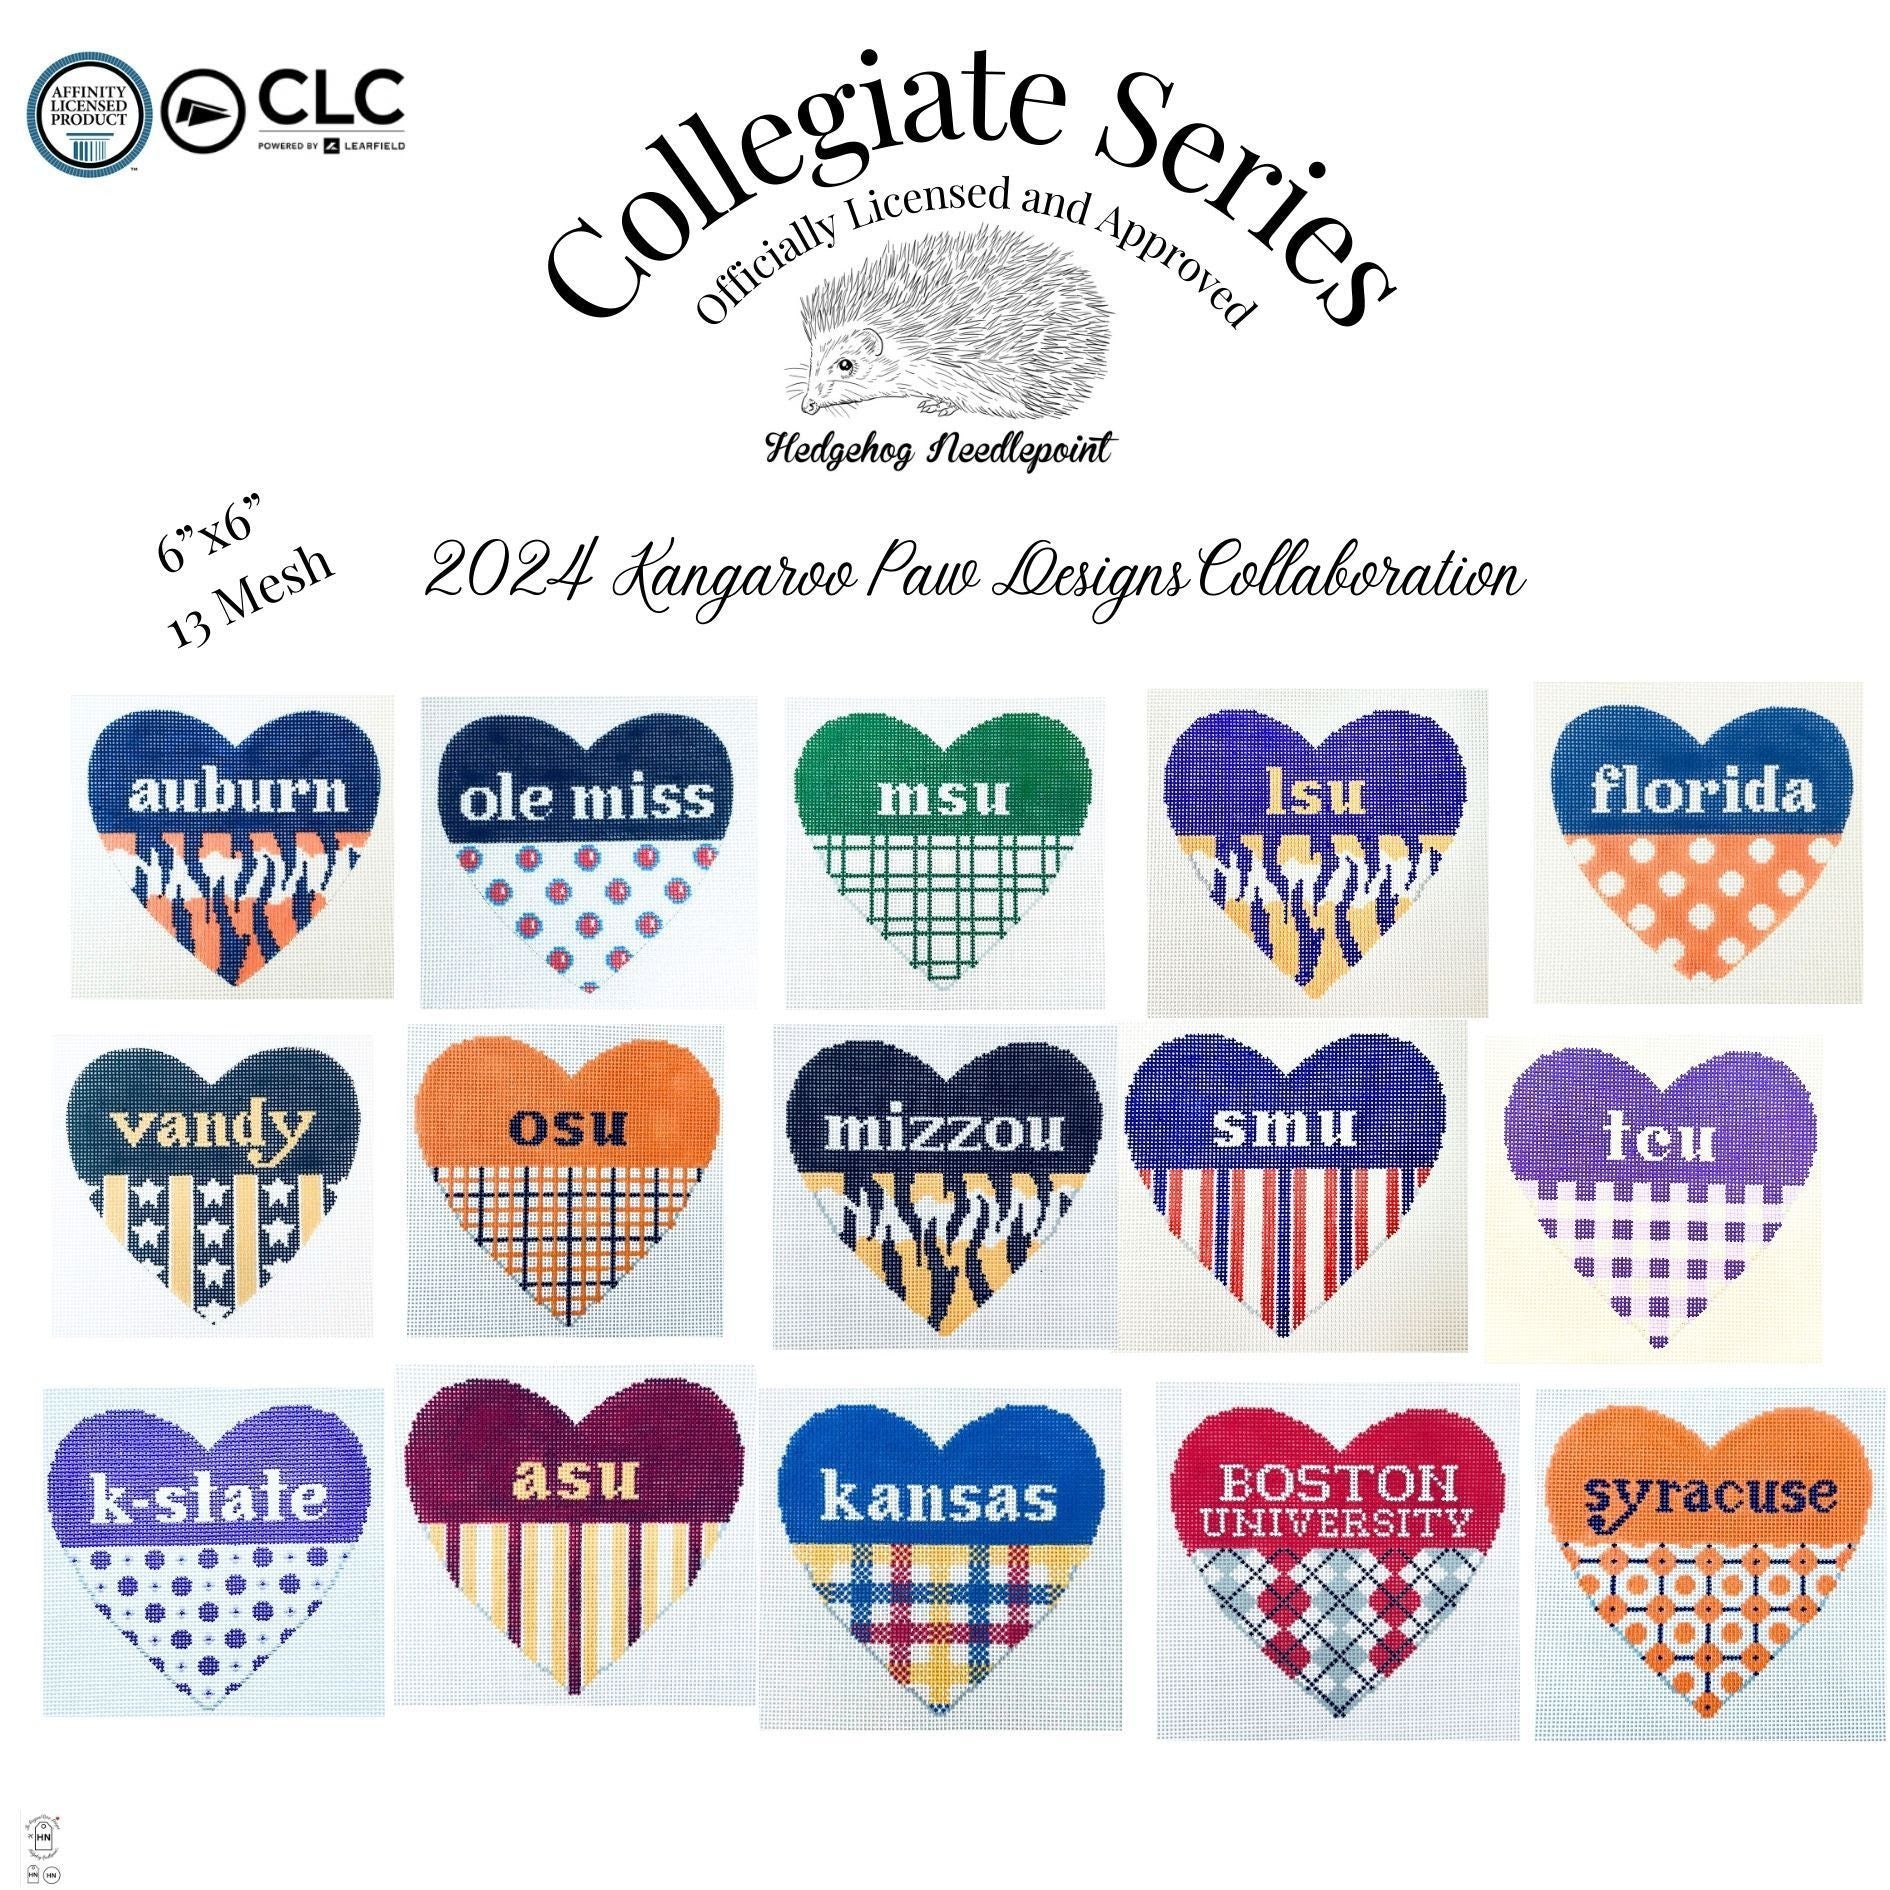 Hedgehog Collegiate Hearts - specify your choice in comments at checkout